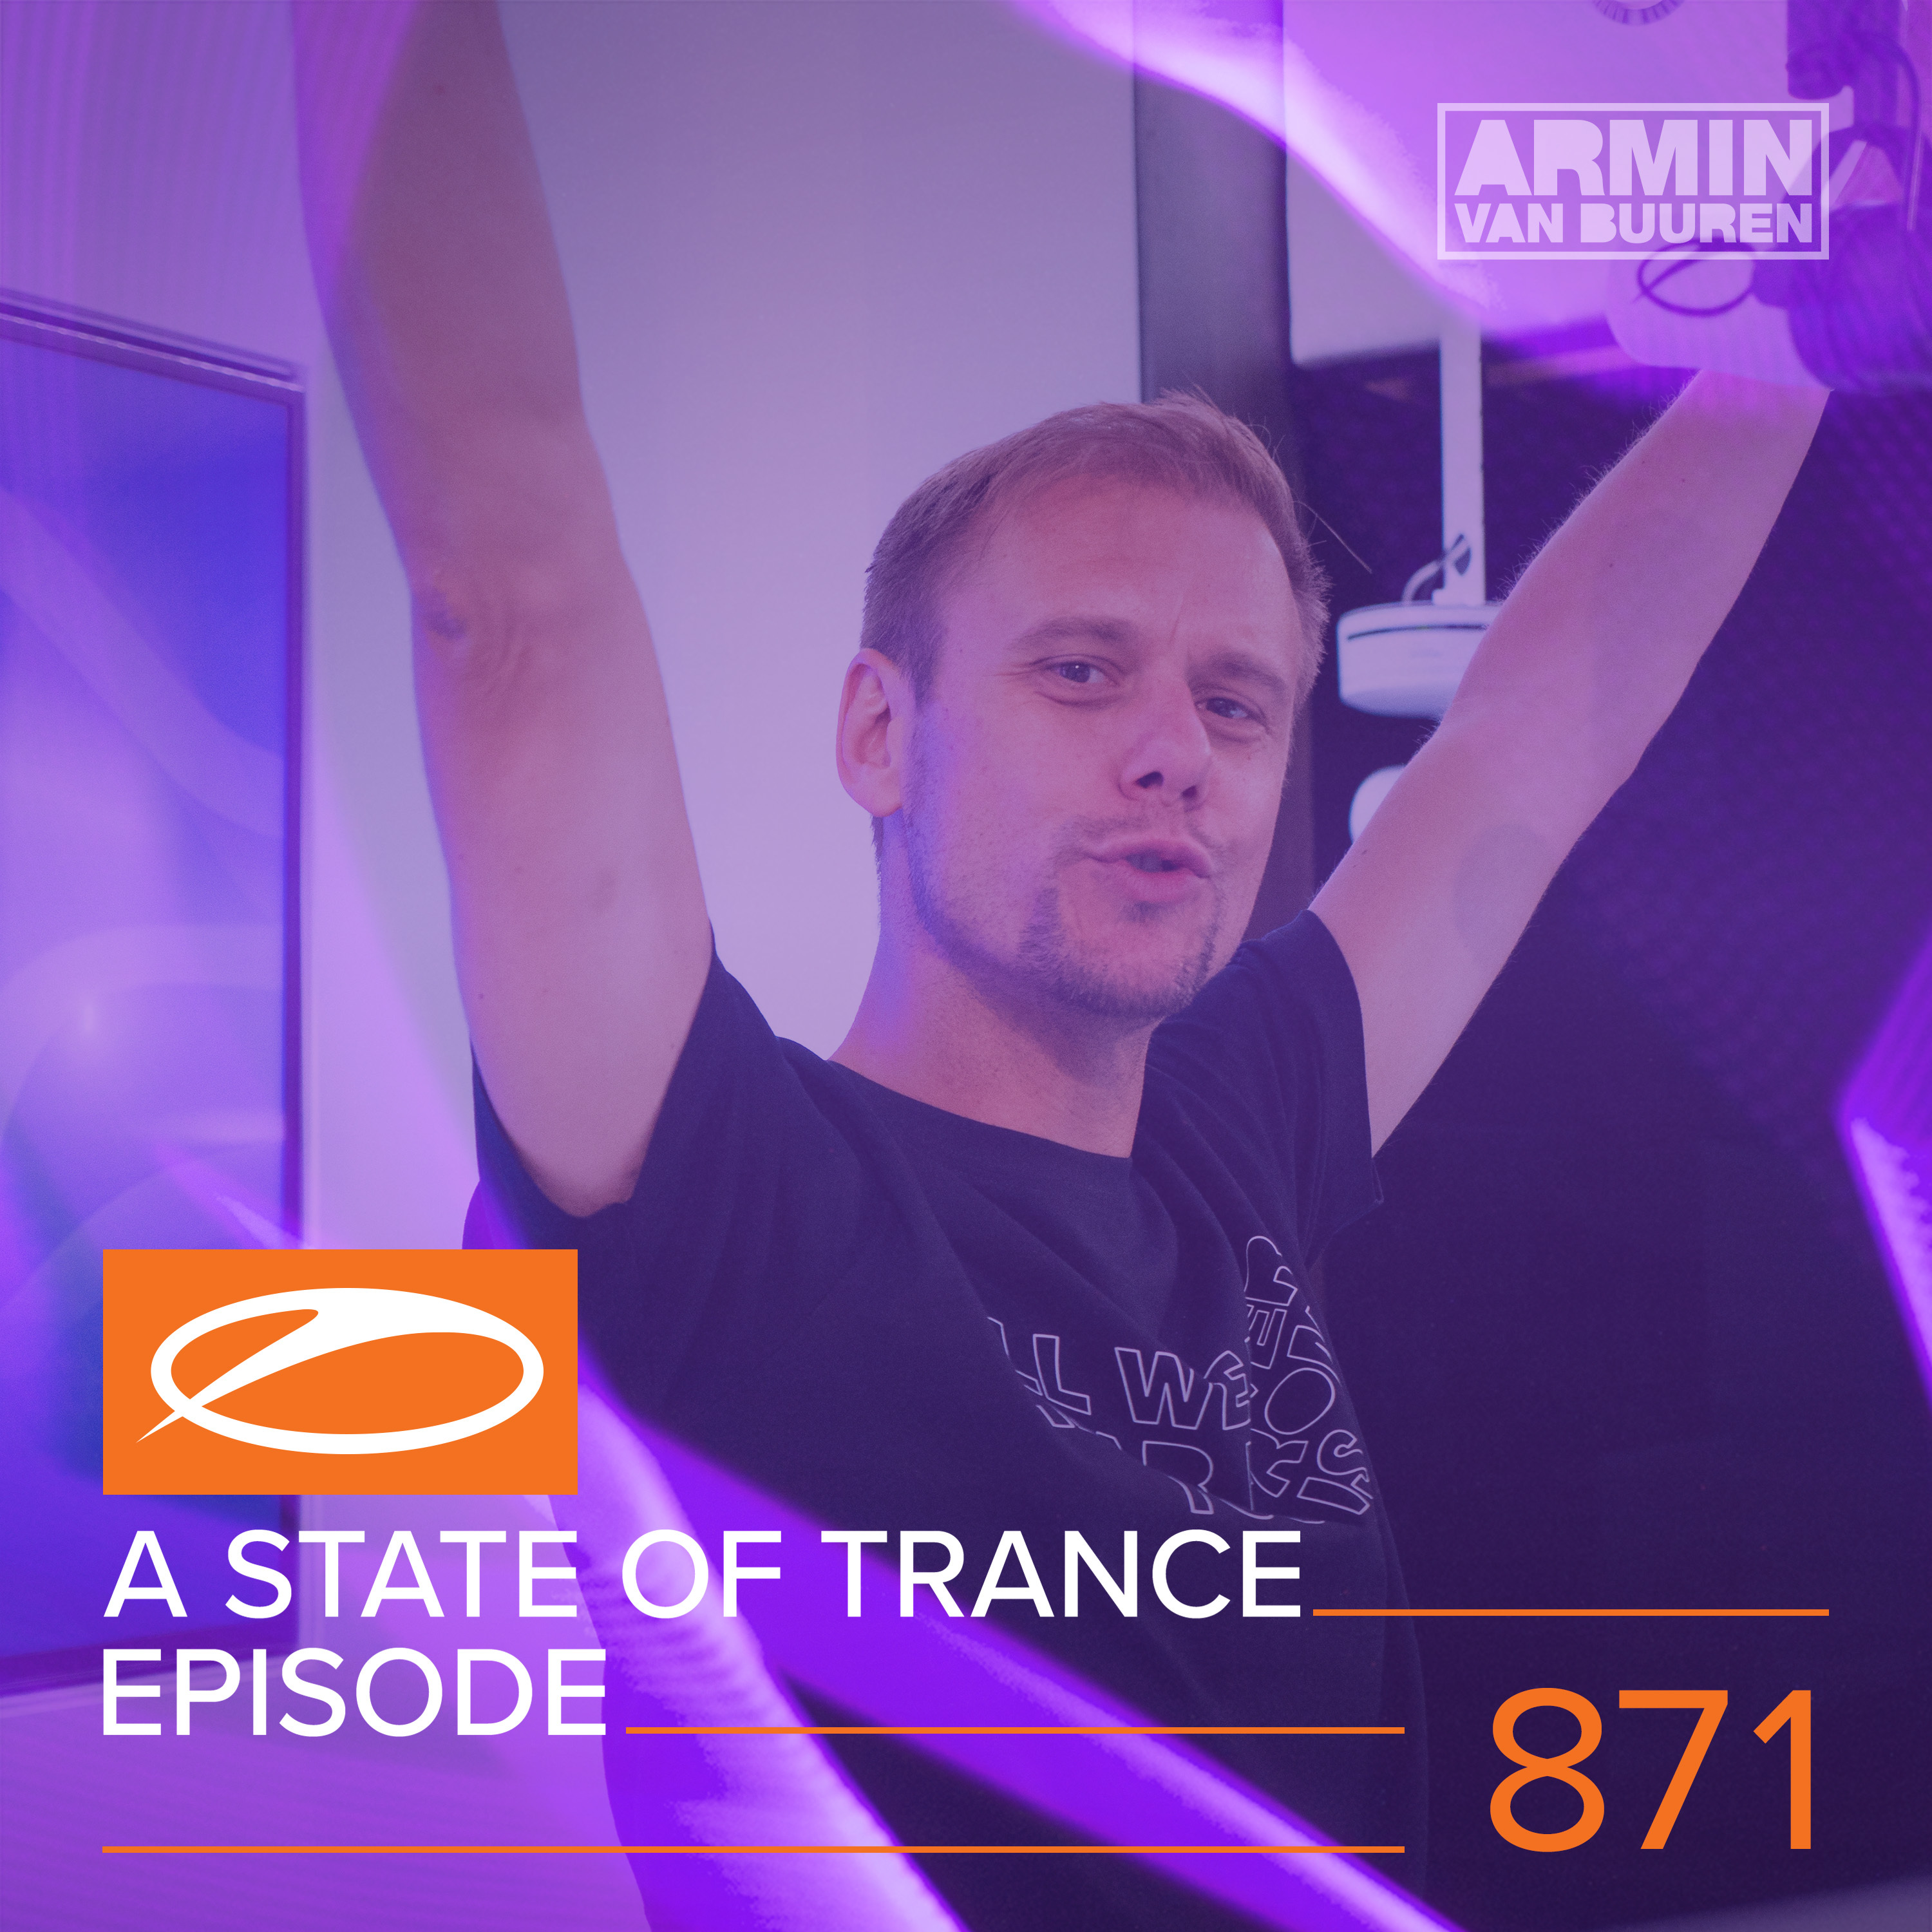 A State Of Trance (ASOT 871) (Coming Up, Pt. 4)